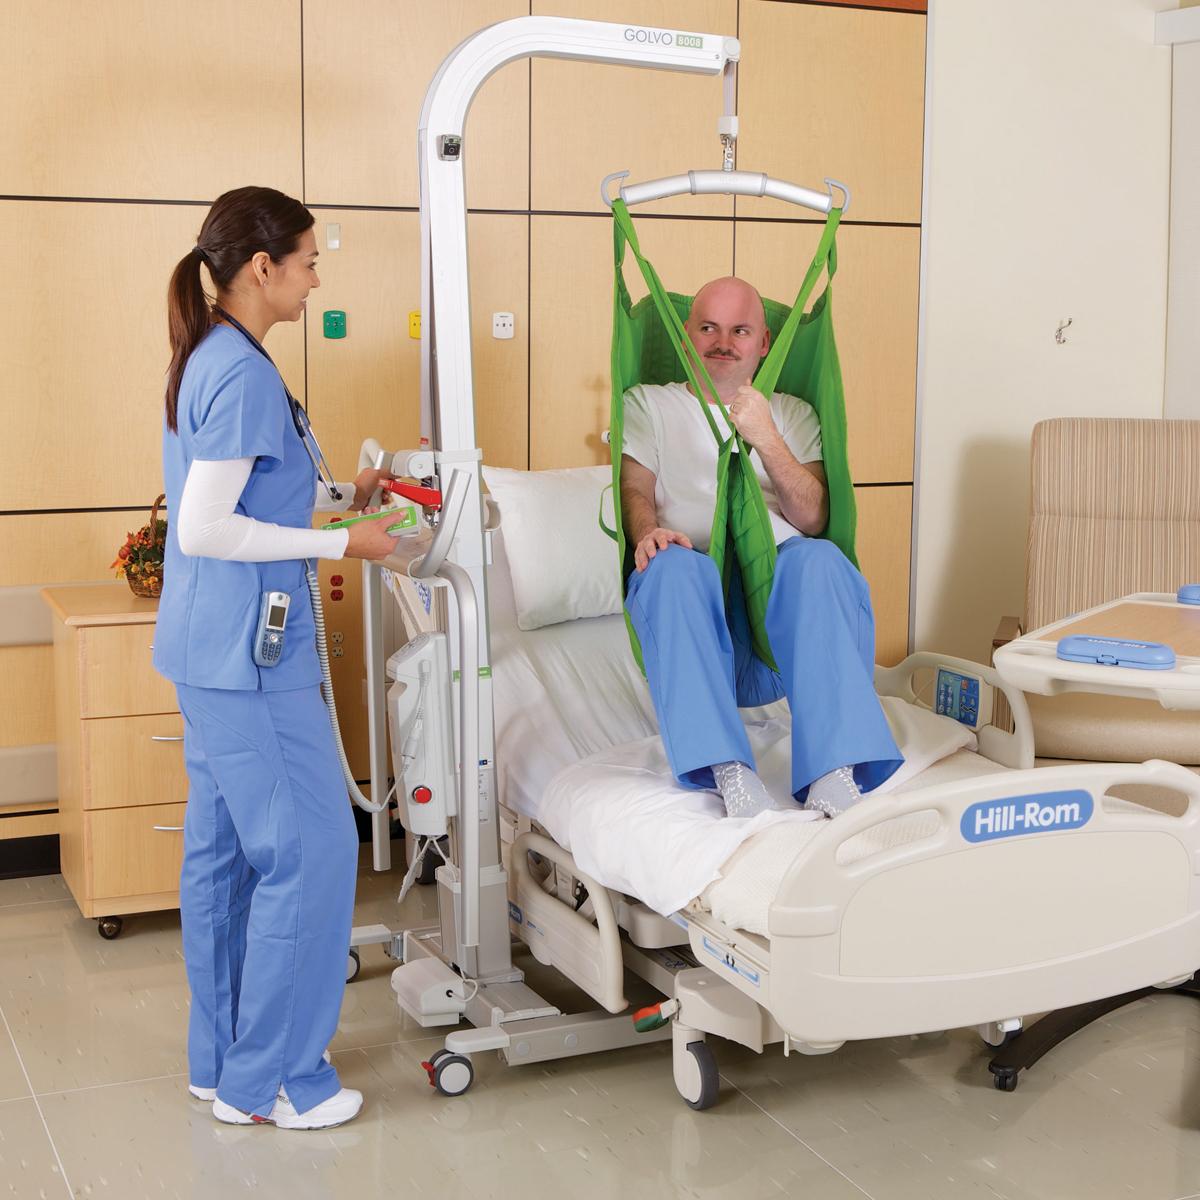 A patient is lifted above a hospital bed by a Golvo Mobile Lift operated by a clinician